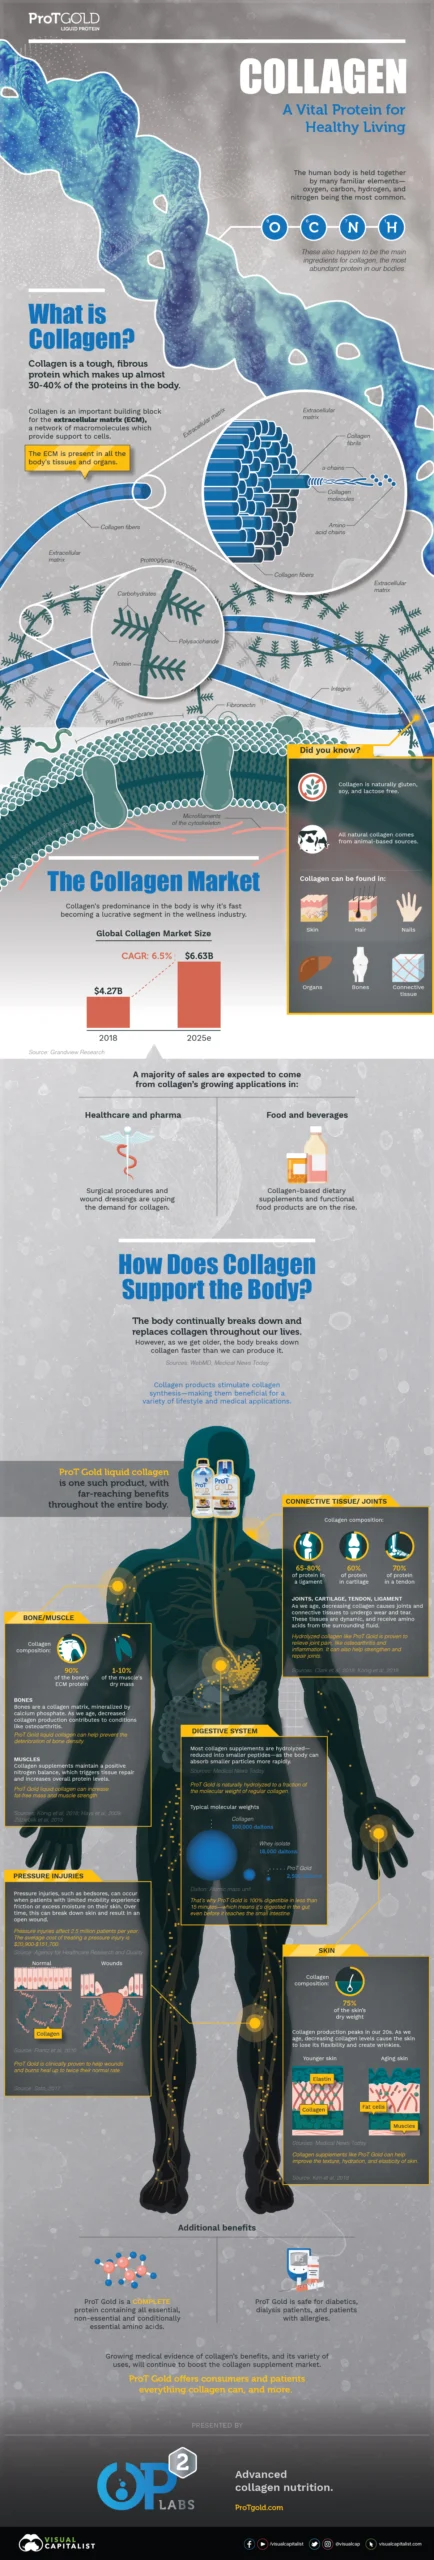 COLLAGEN – A Vital Protein For Healthy Living
